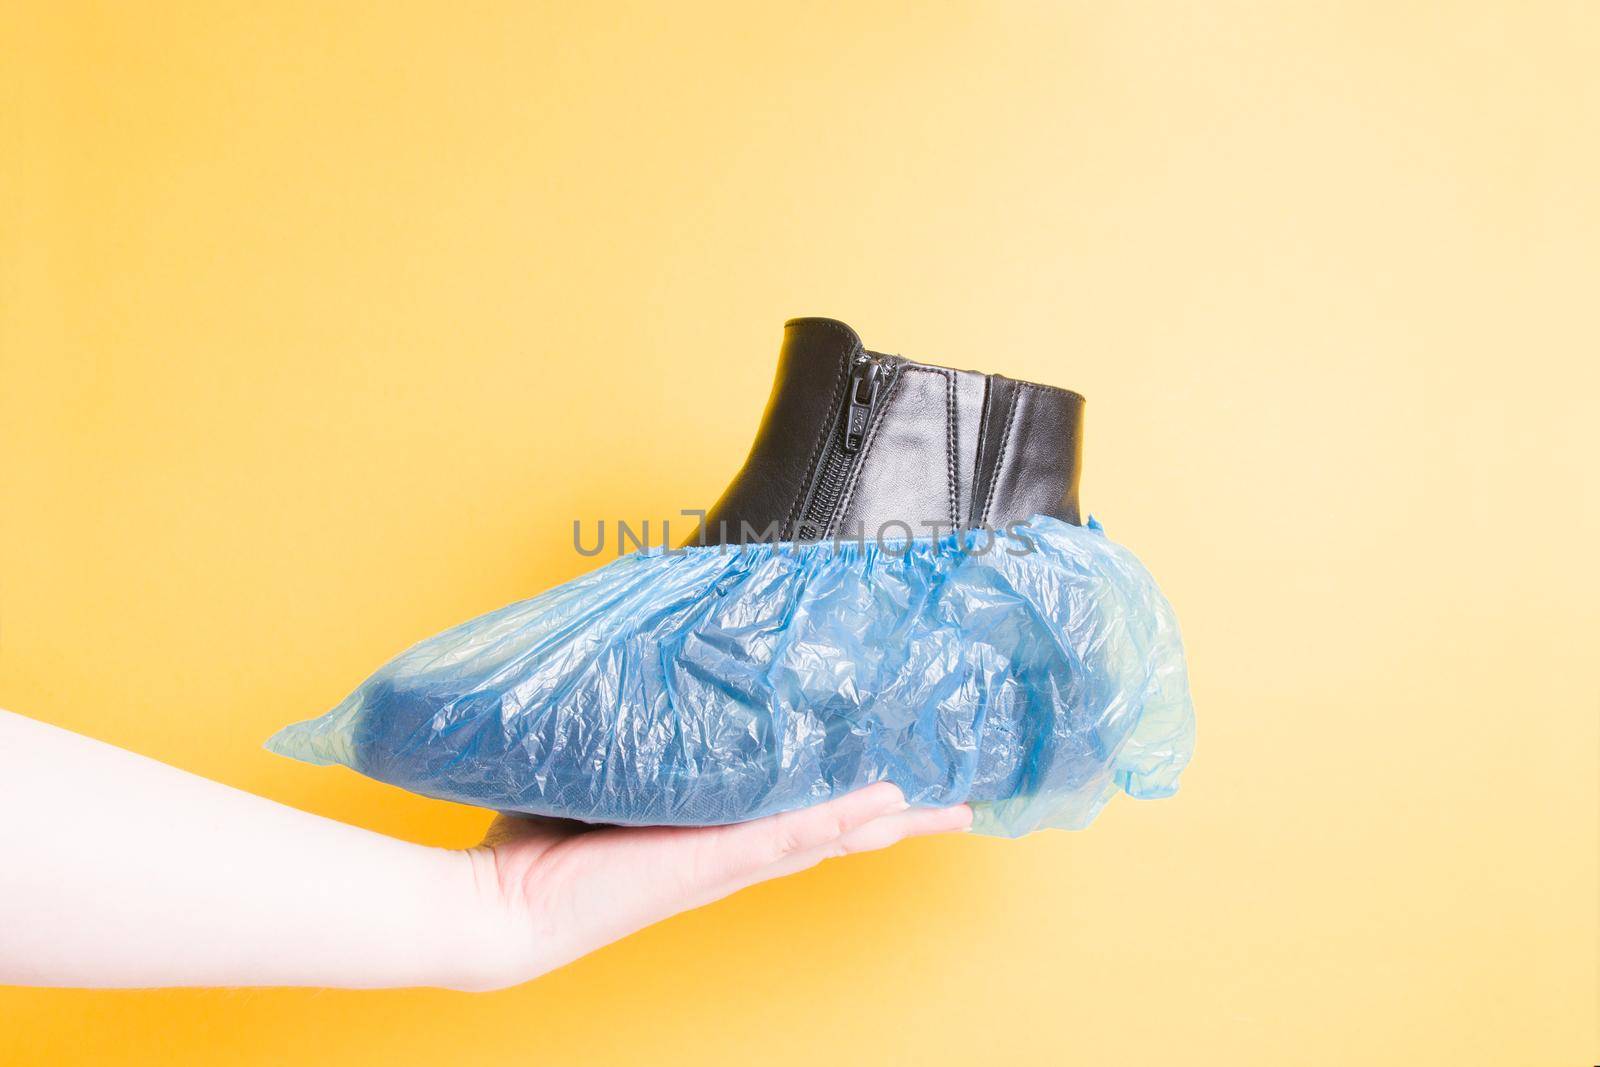 female hand holds a black leather female boot in boot covers, yellow background